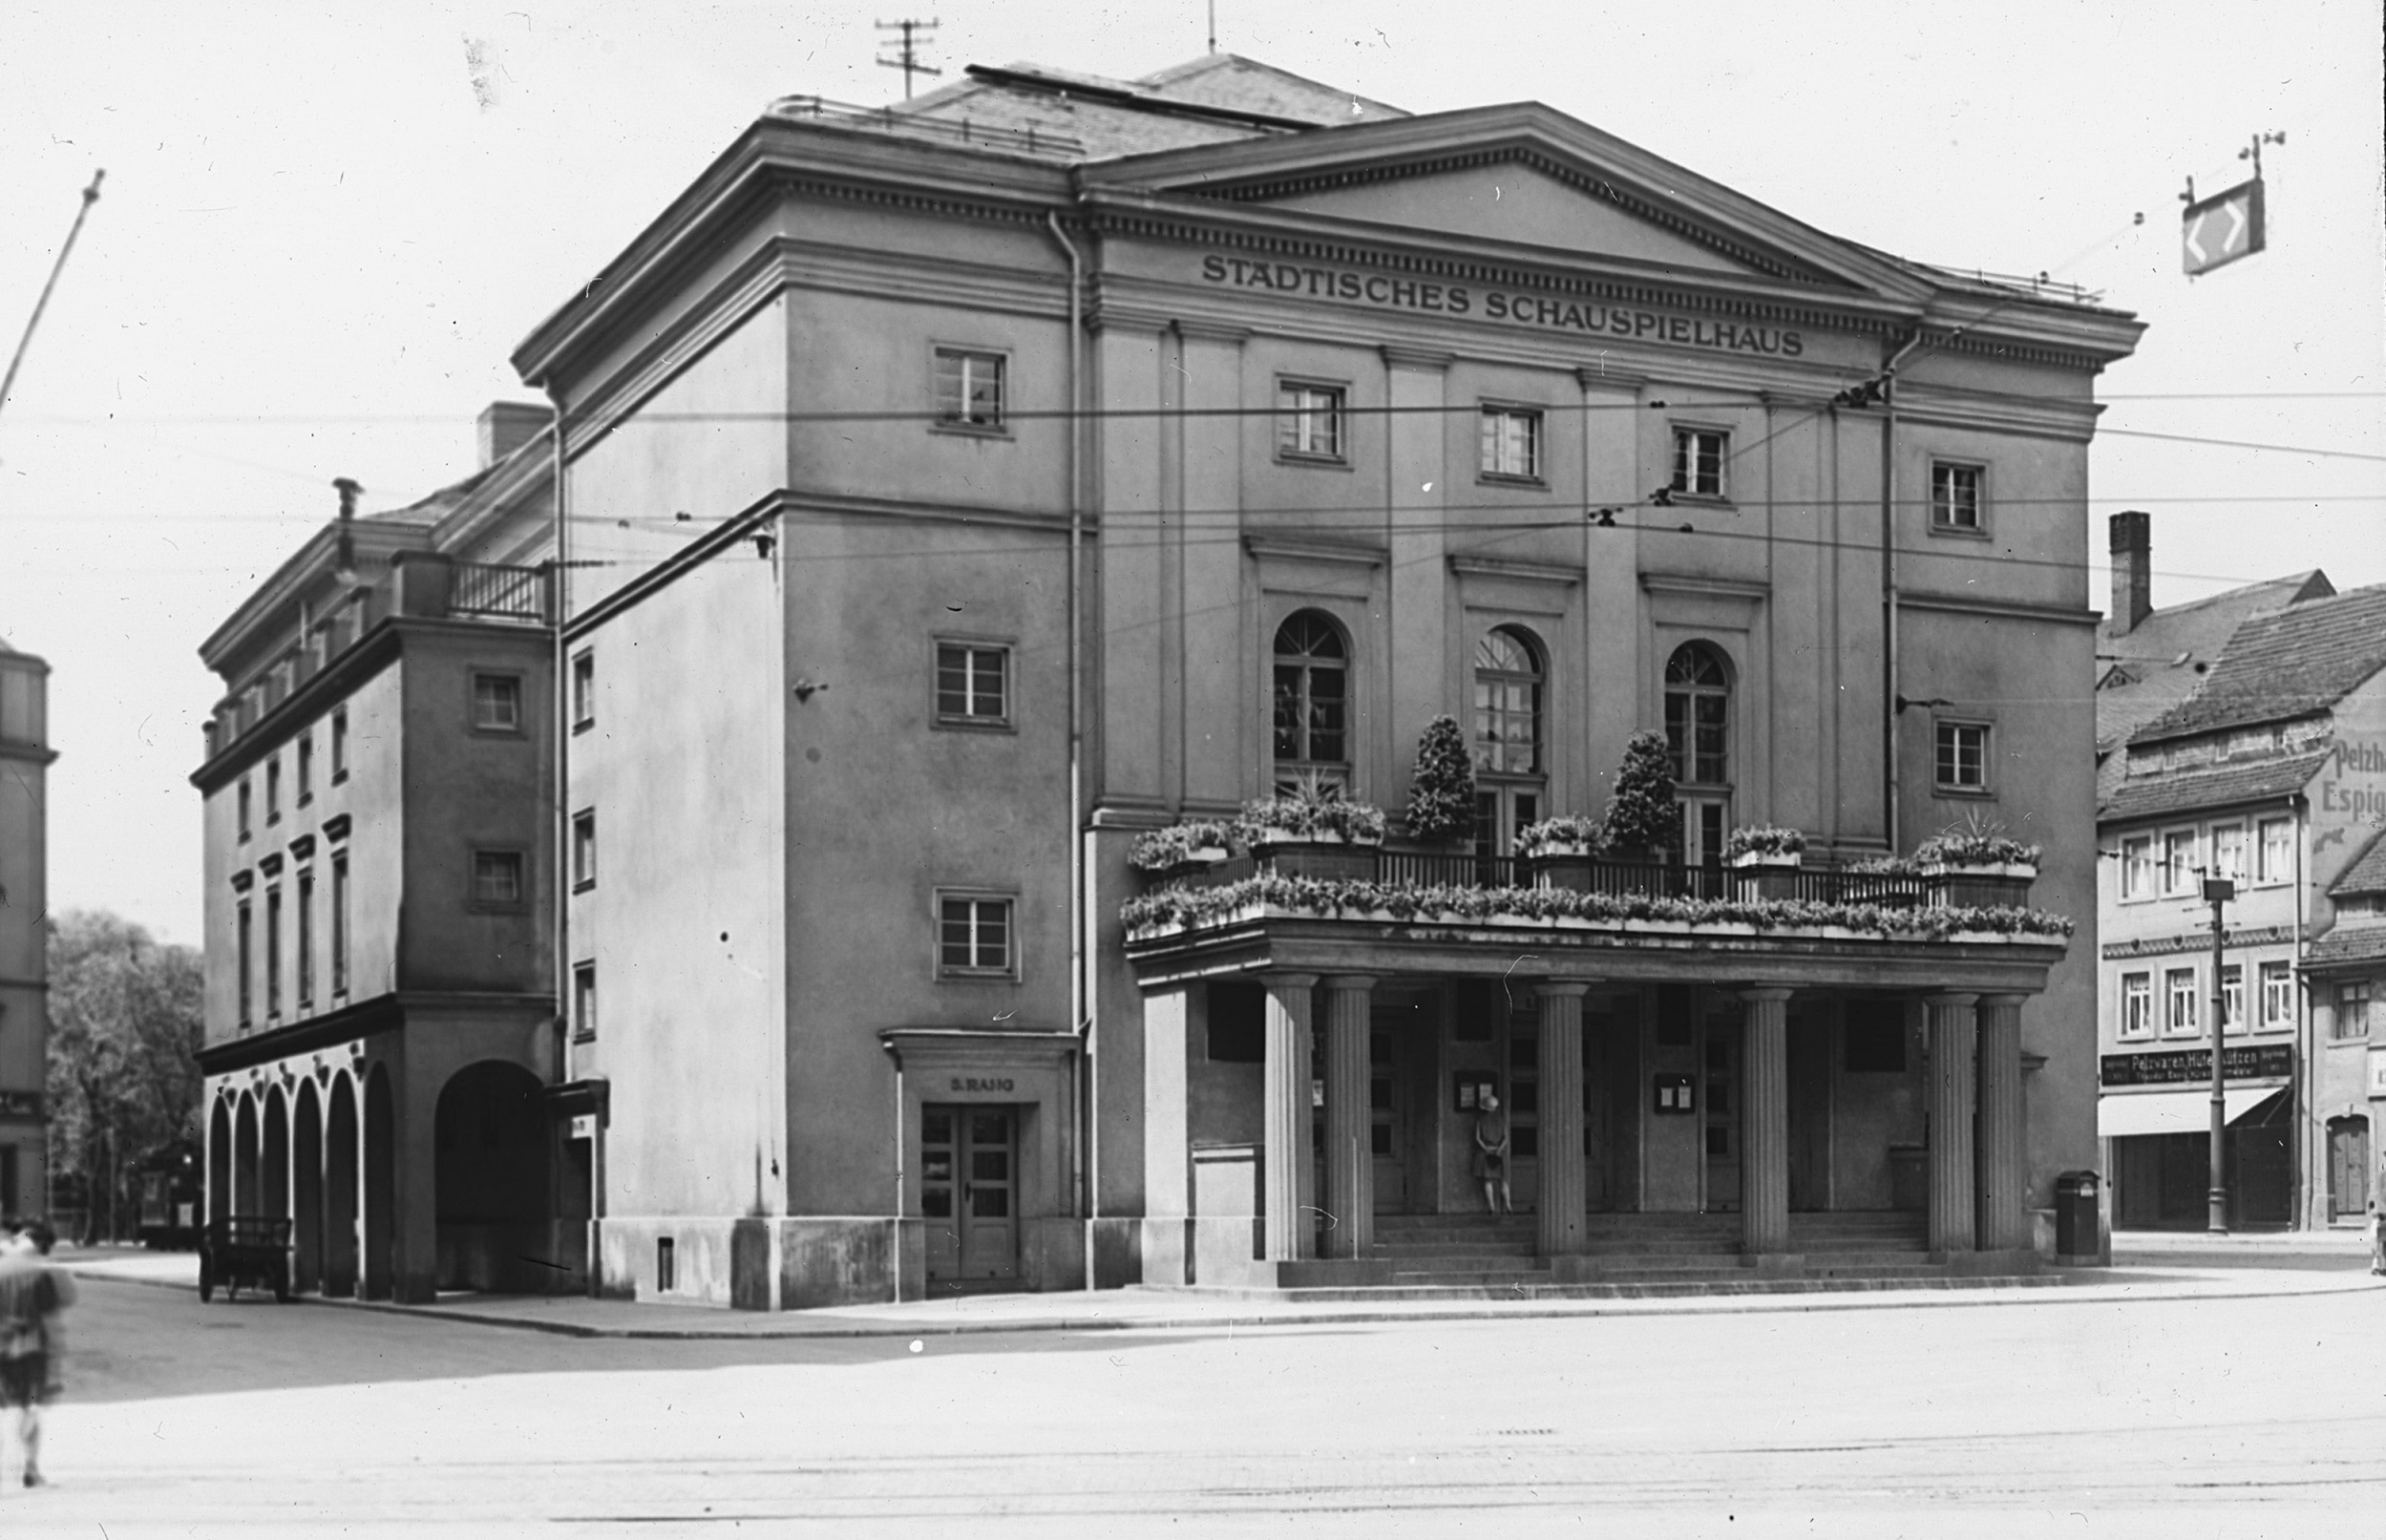 The theatre, picture here in about 1900, was located in the middle of what is today the Theaterstraße. It burned down on 5 March 1945.